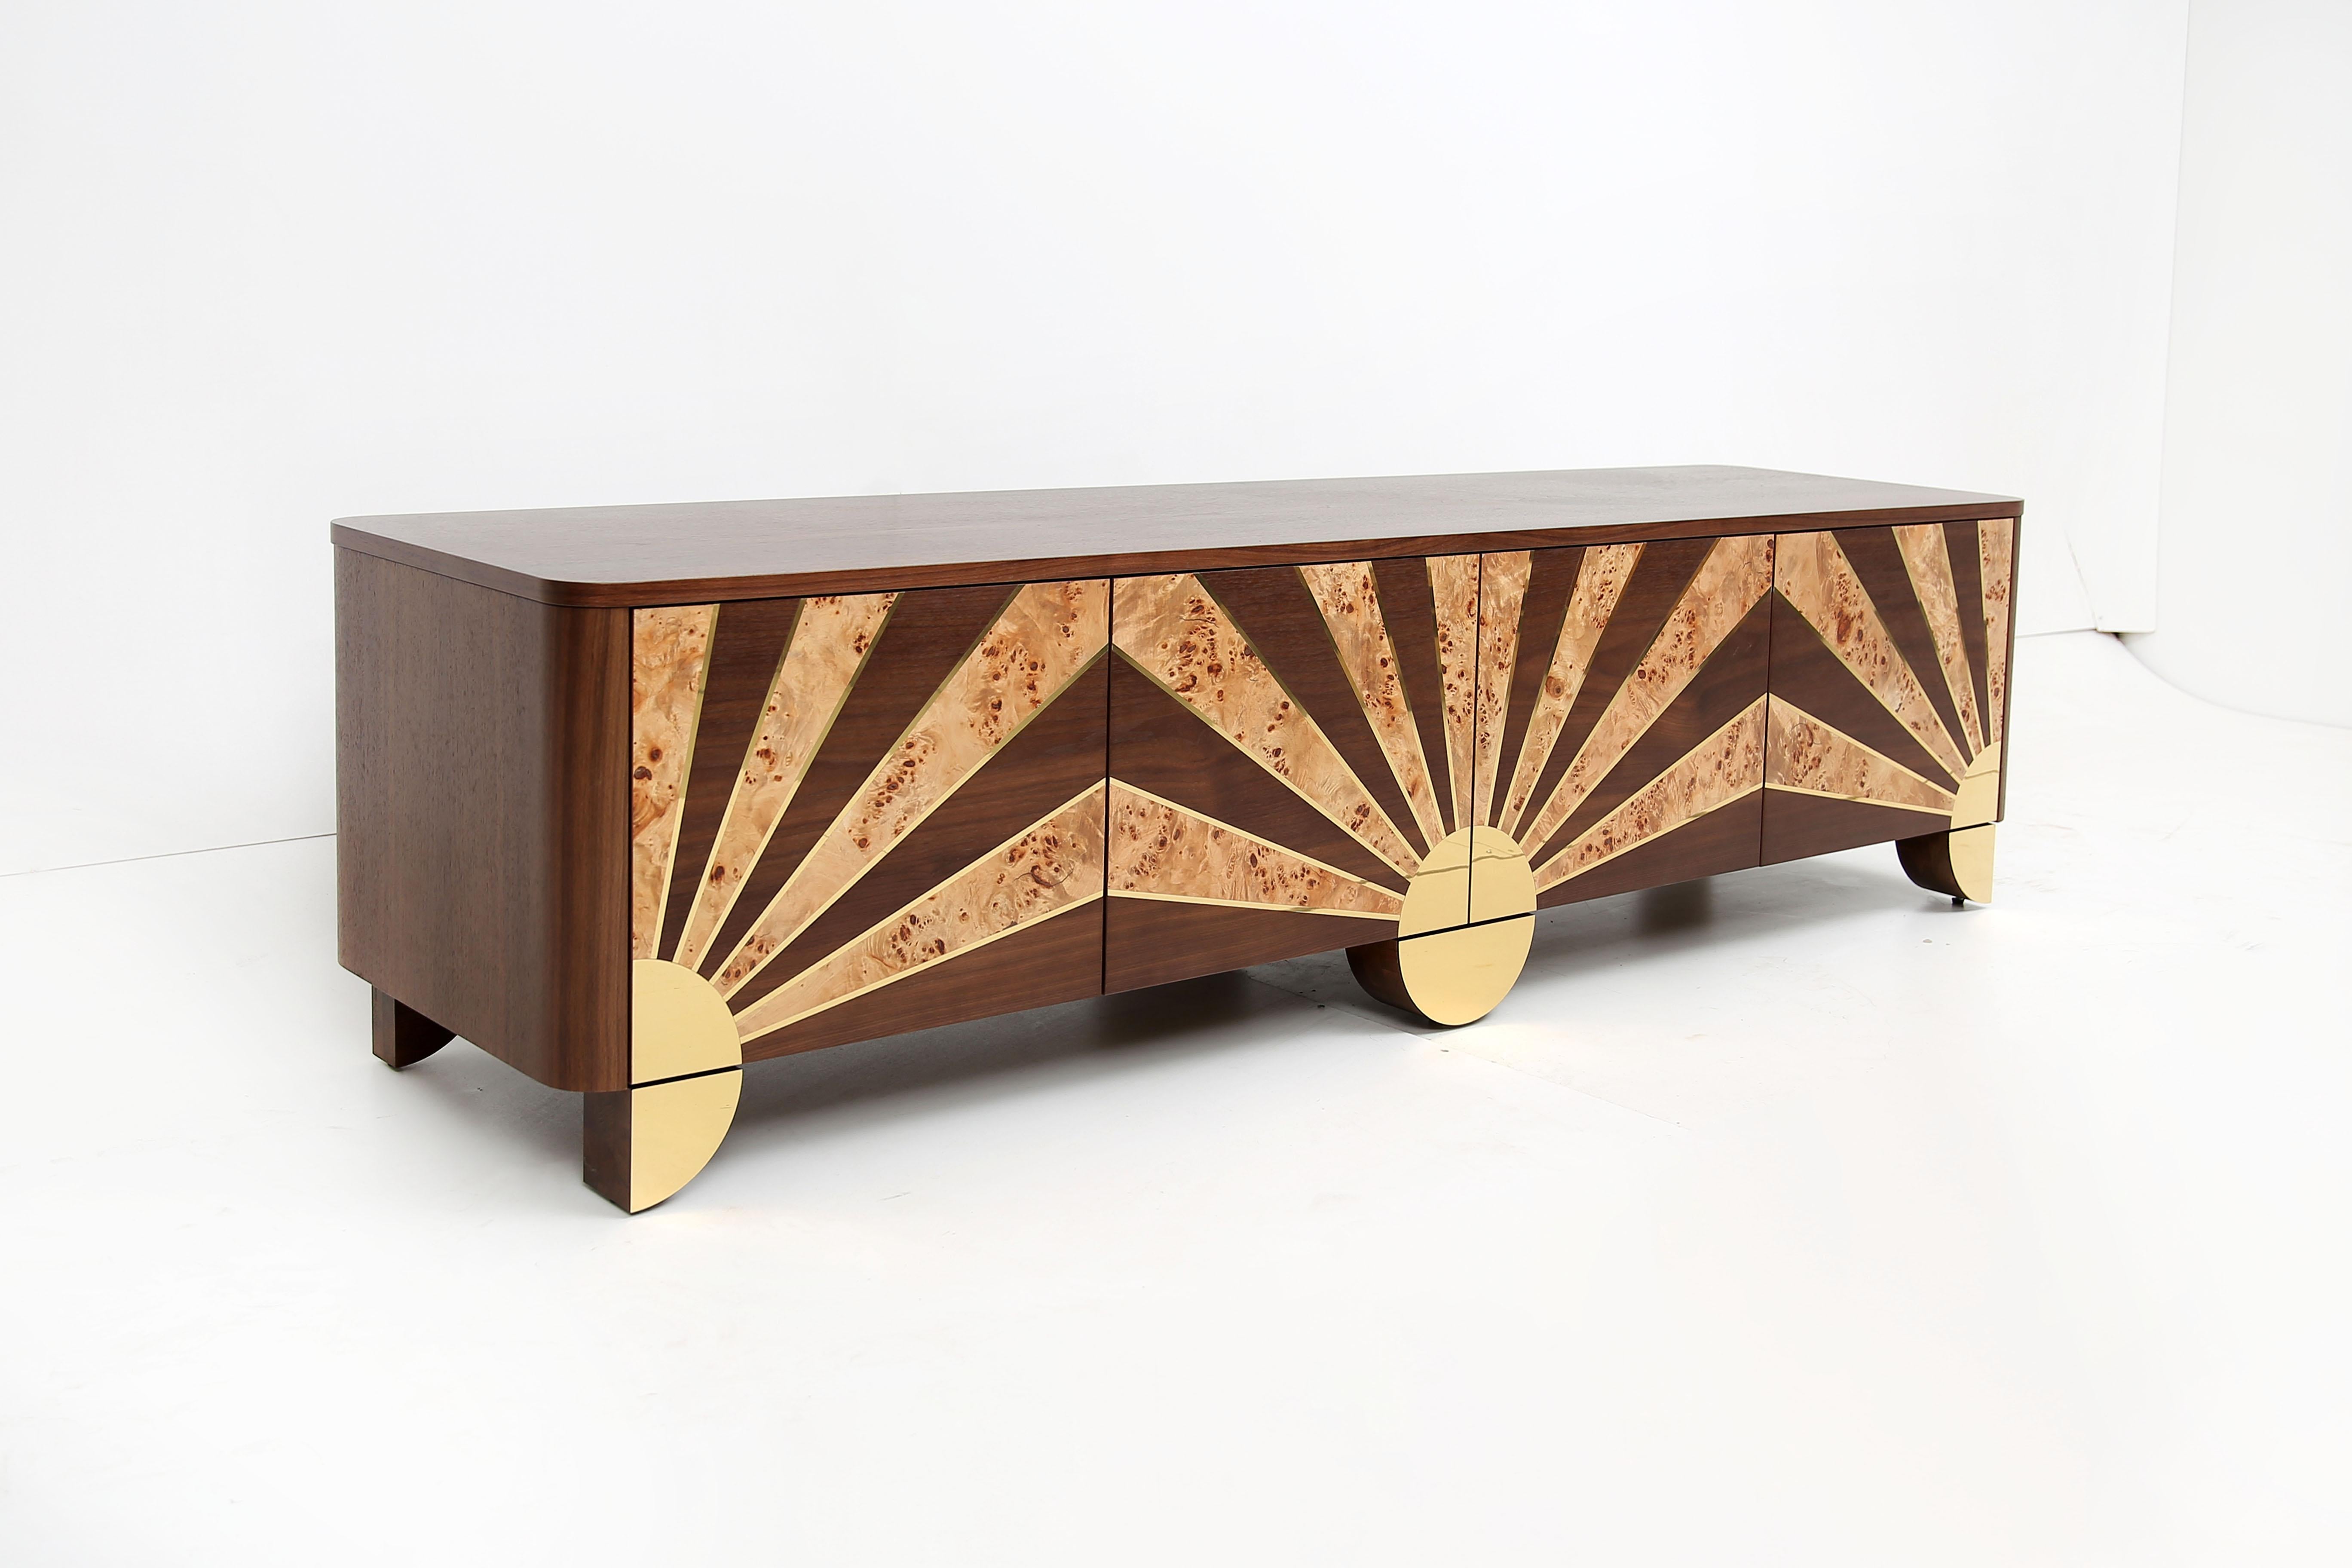 Media console Sinatra! A statement 4 -door console together with a push-pull opening mechanism to complete the contemporary look and feel. A fabulous console from a collection inspired by the Art Deco style Each item is truly precious, where metal